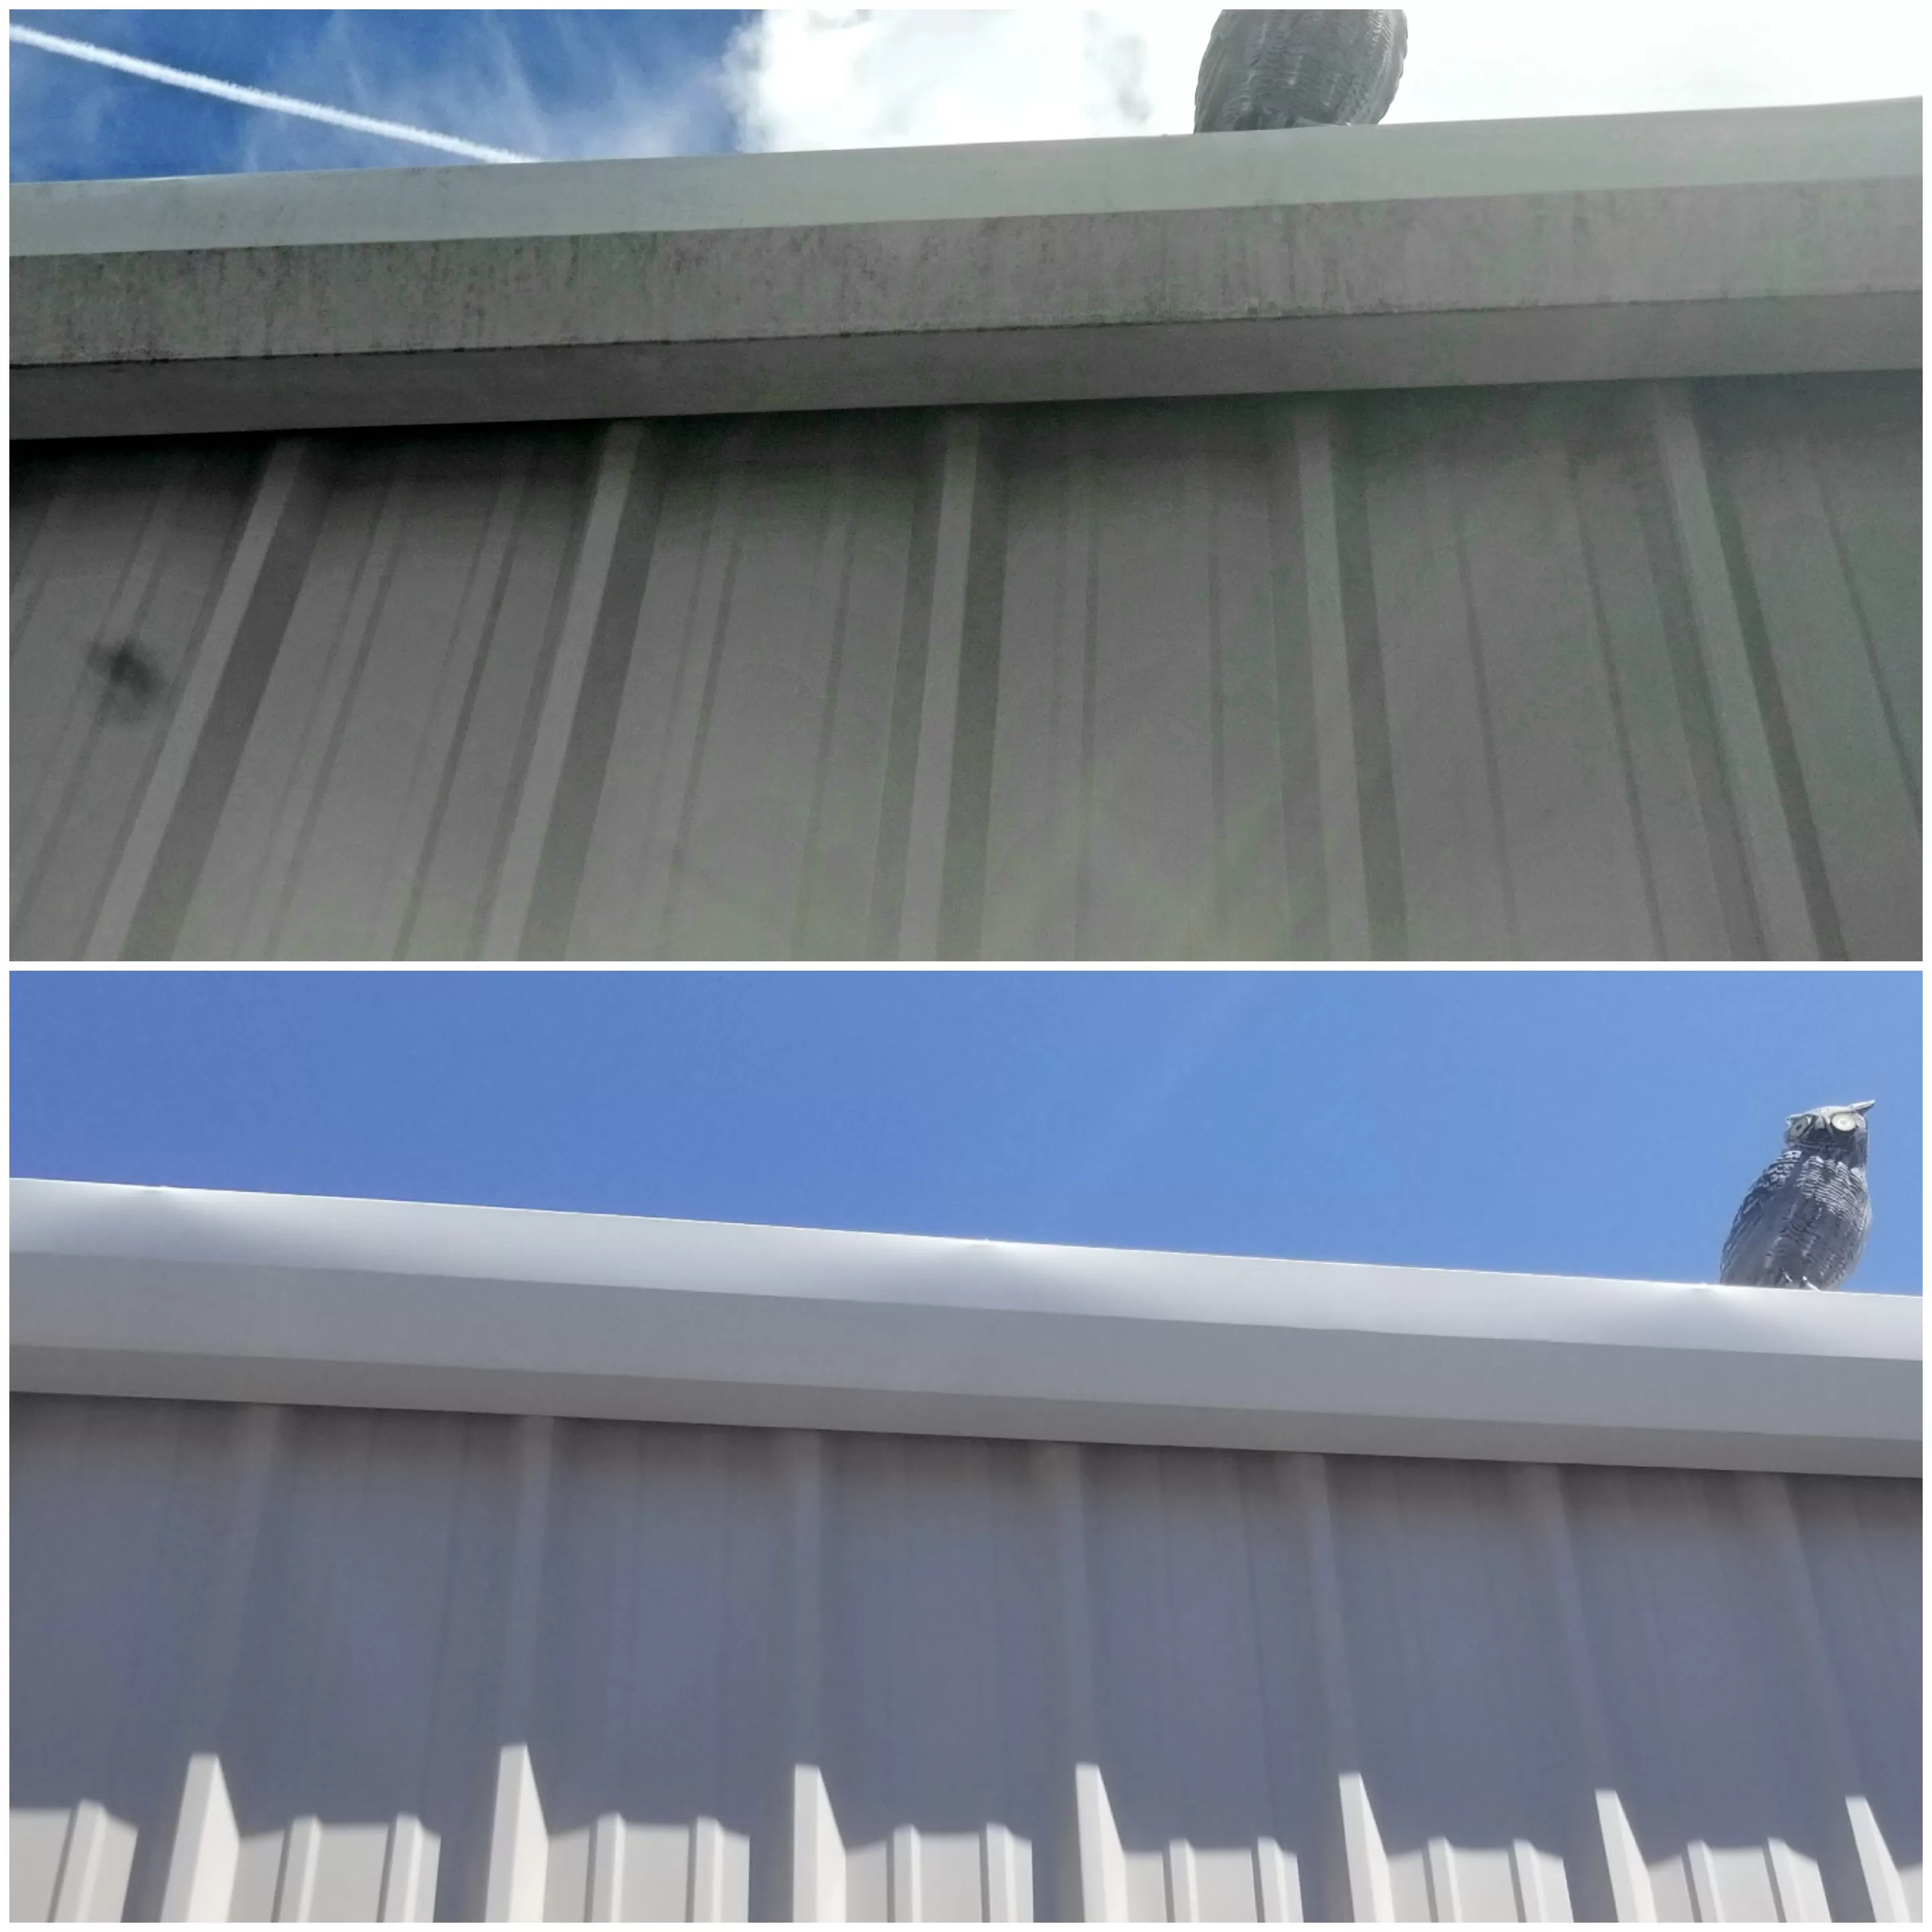 Commercial Pressure Washing for an Automotive Shop in Orlando, FL